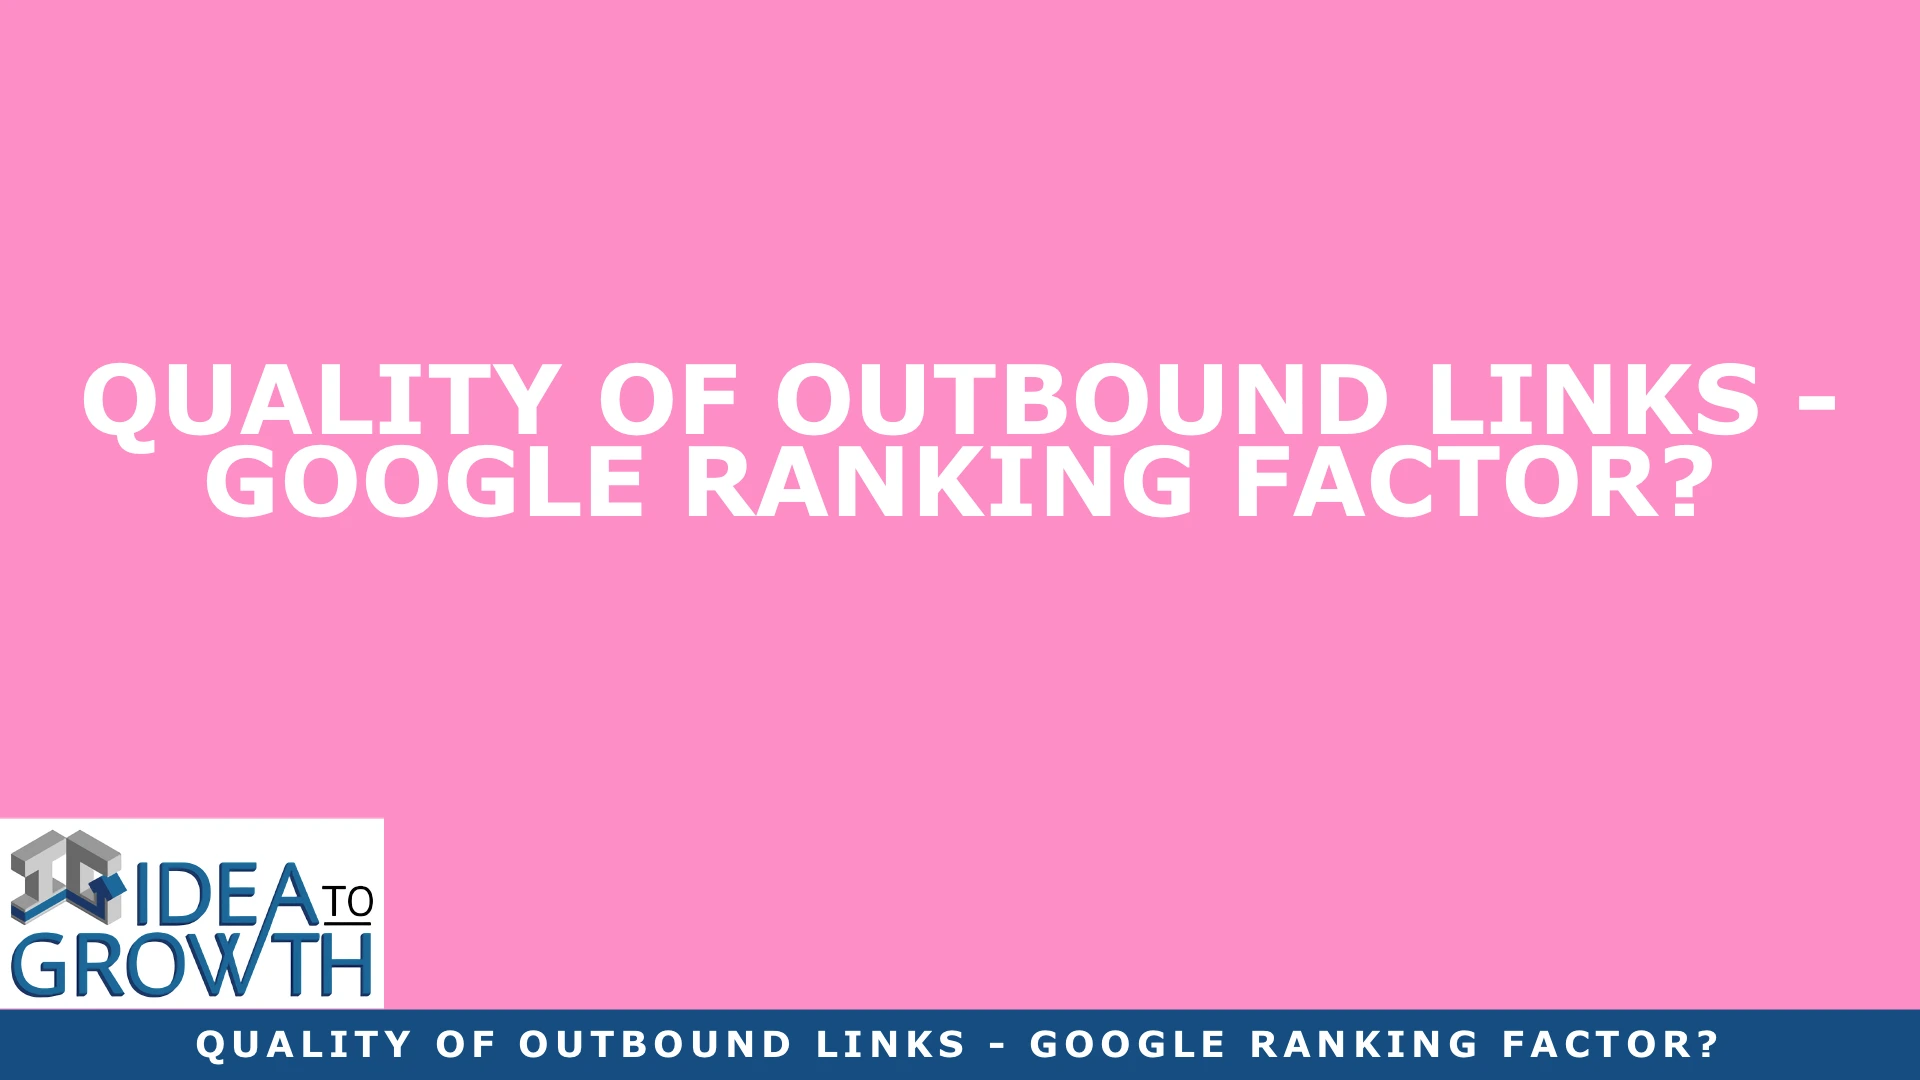 QUALITY OF OUTBOUND LINKS - GOOGLE RANKING FACTOR?